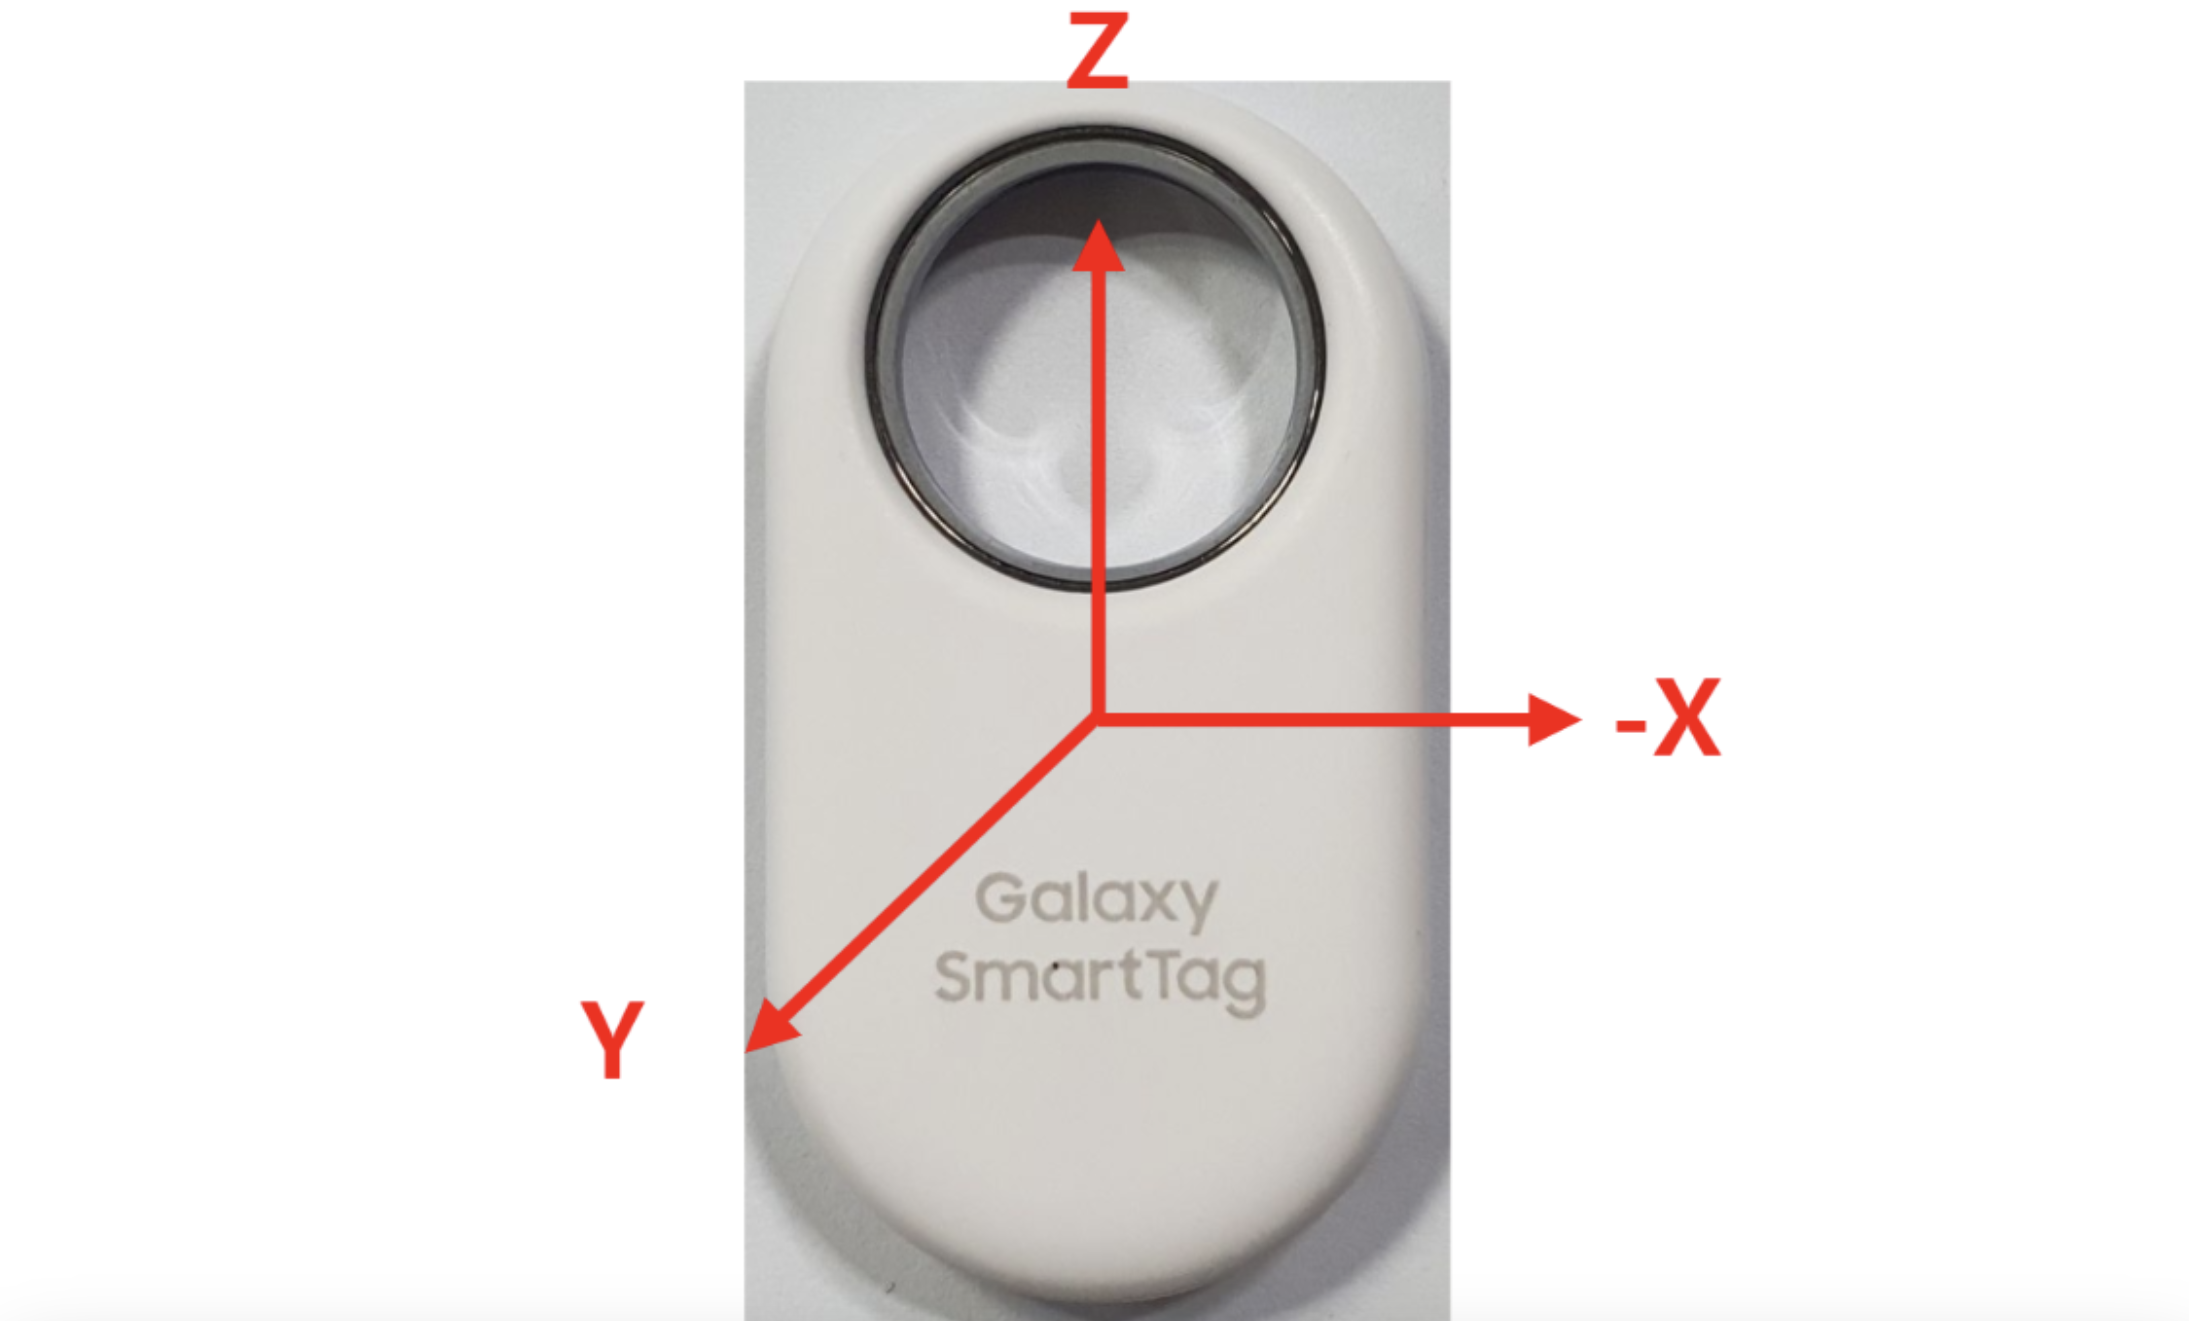 Galaxy SmartTag 2 review: Every Samsung phone owner needs it - SamMobile